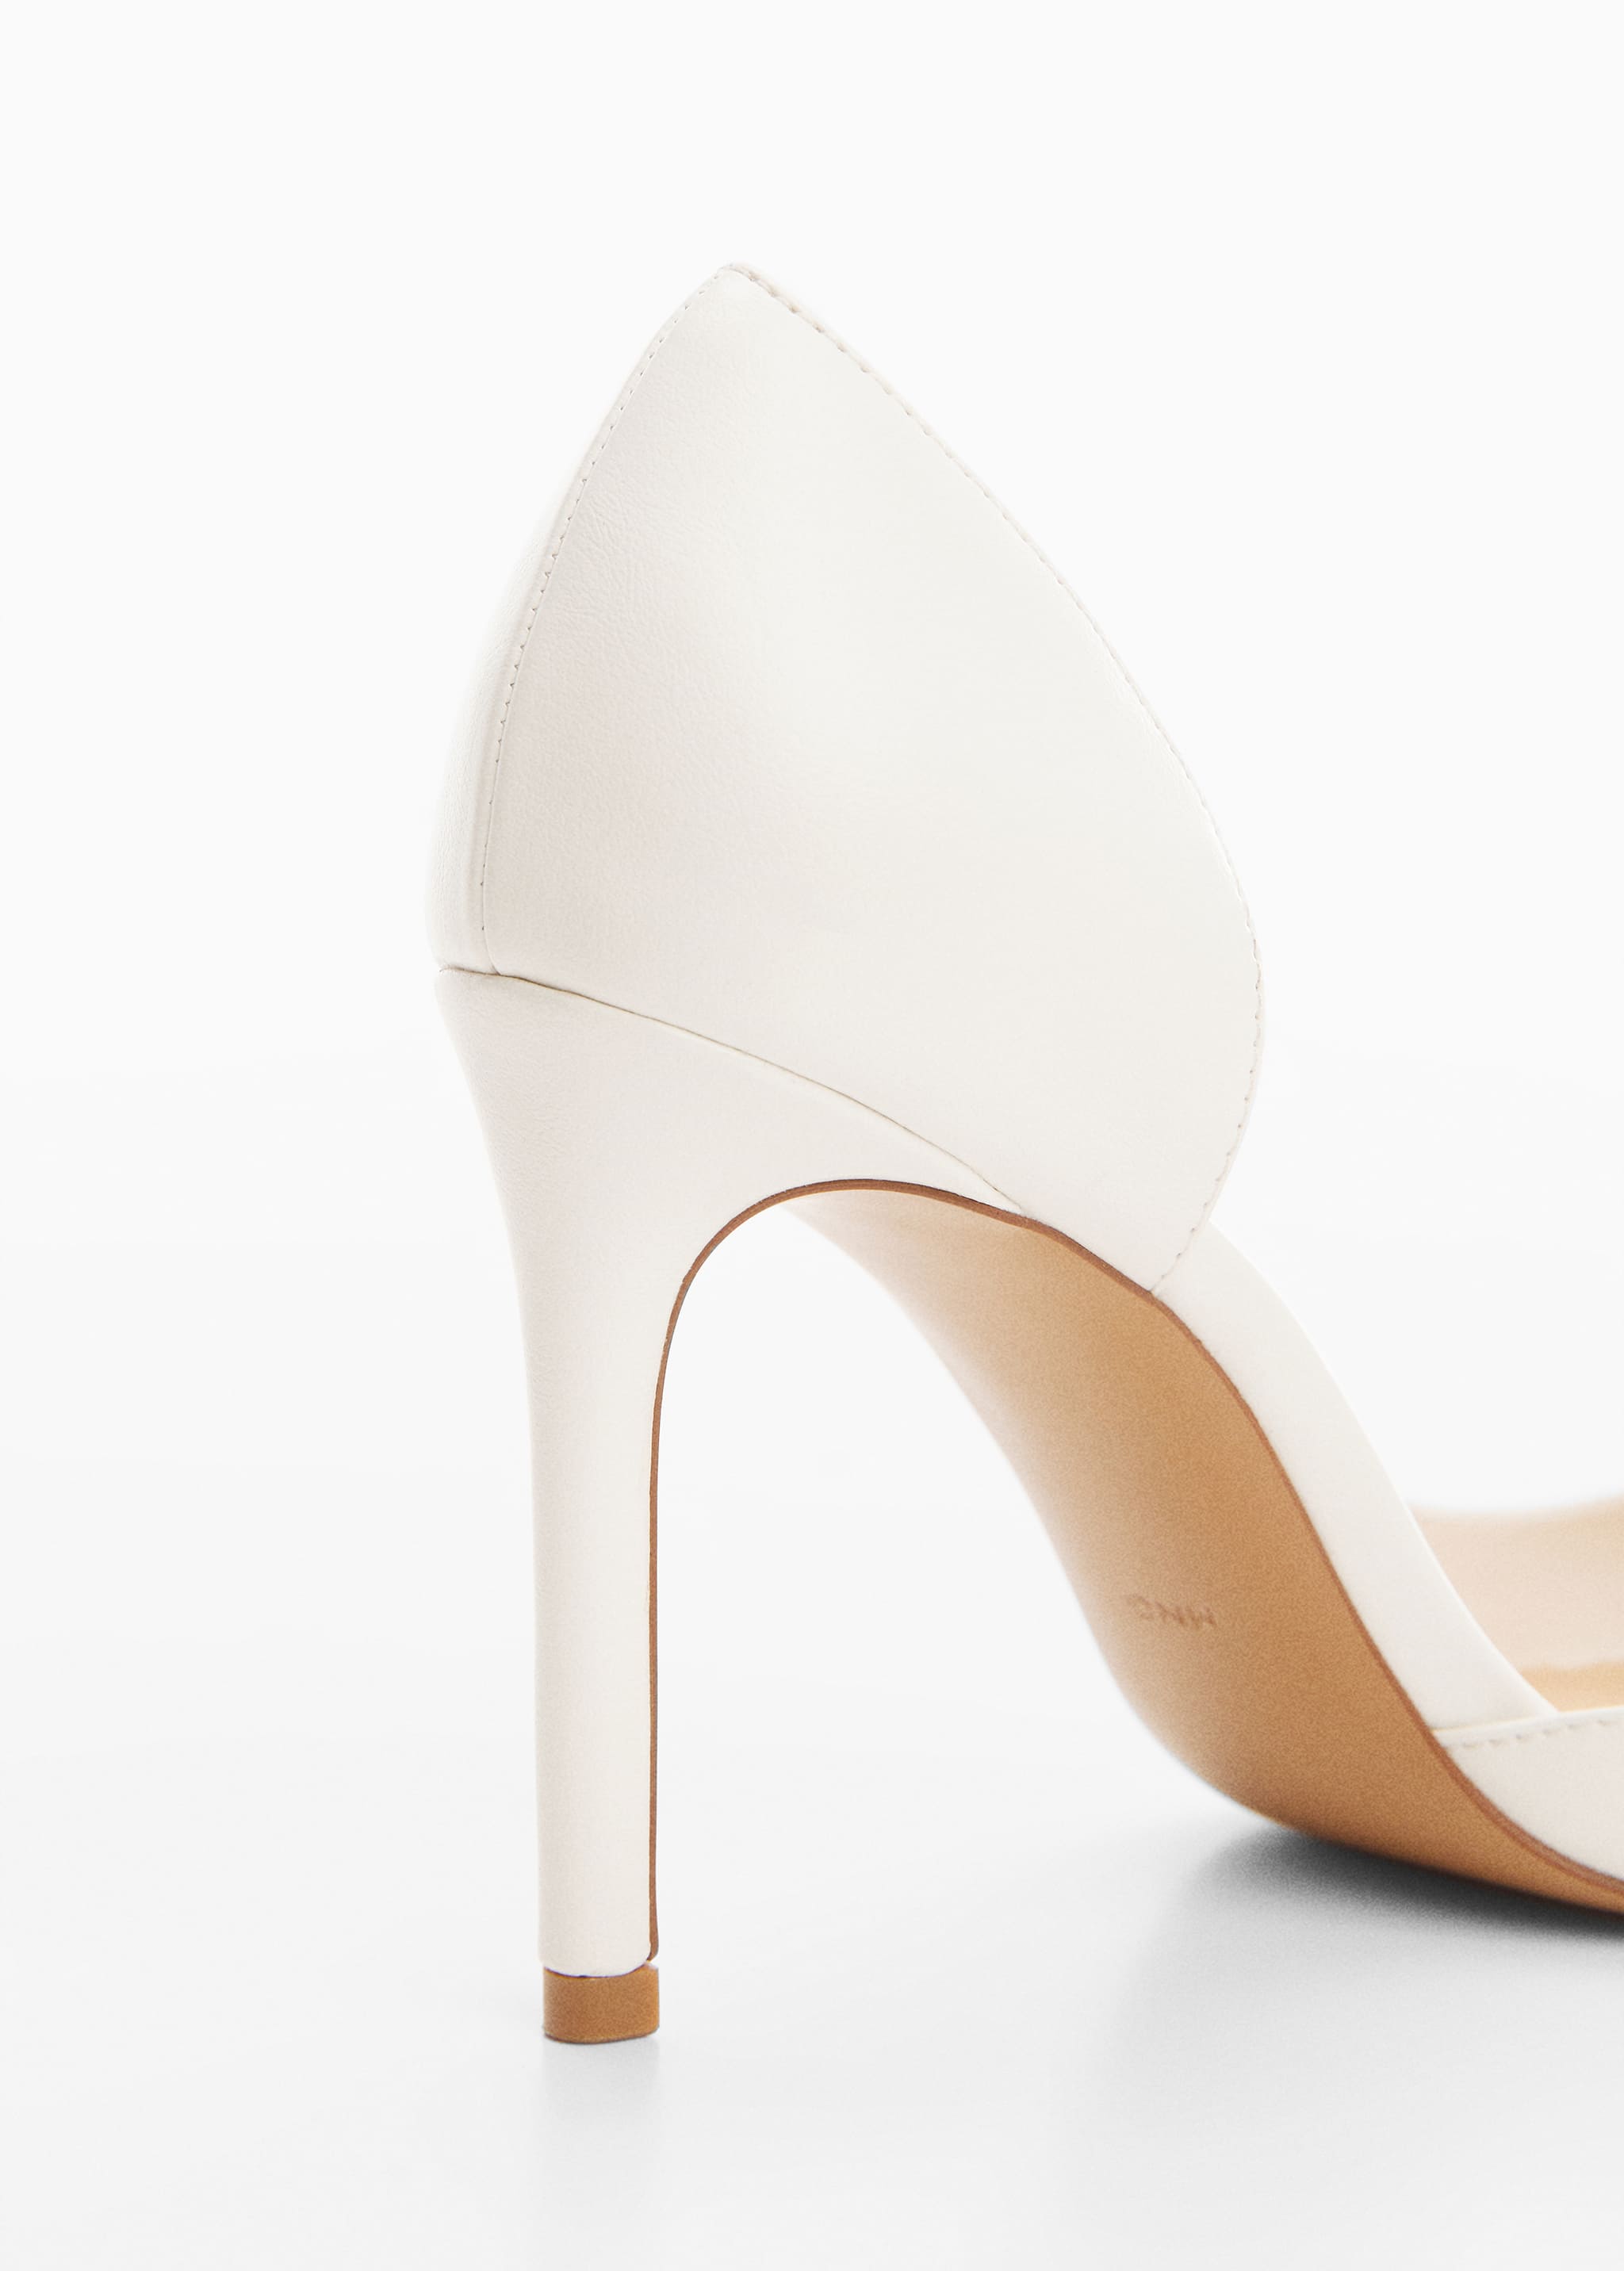 Asymmetrical heeled shoes - Details of the article 1